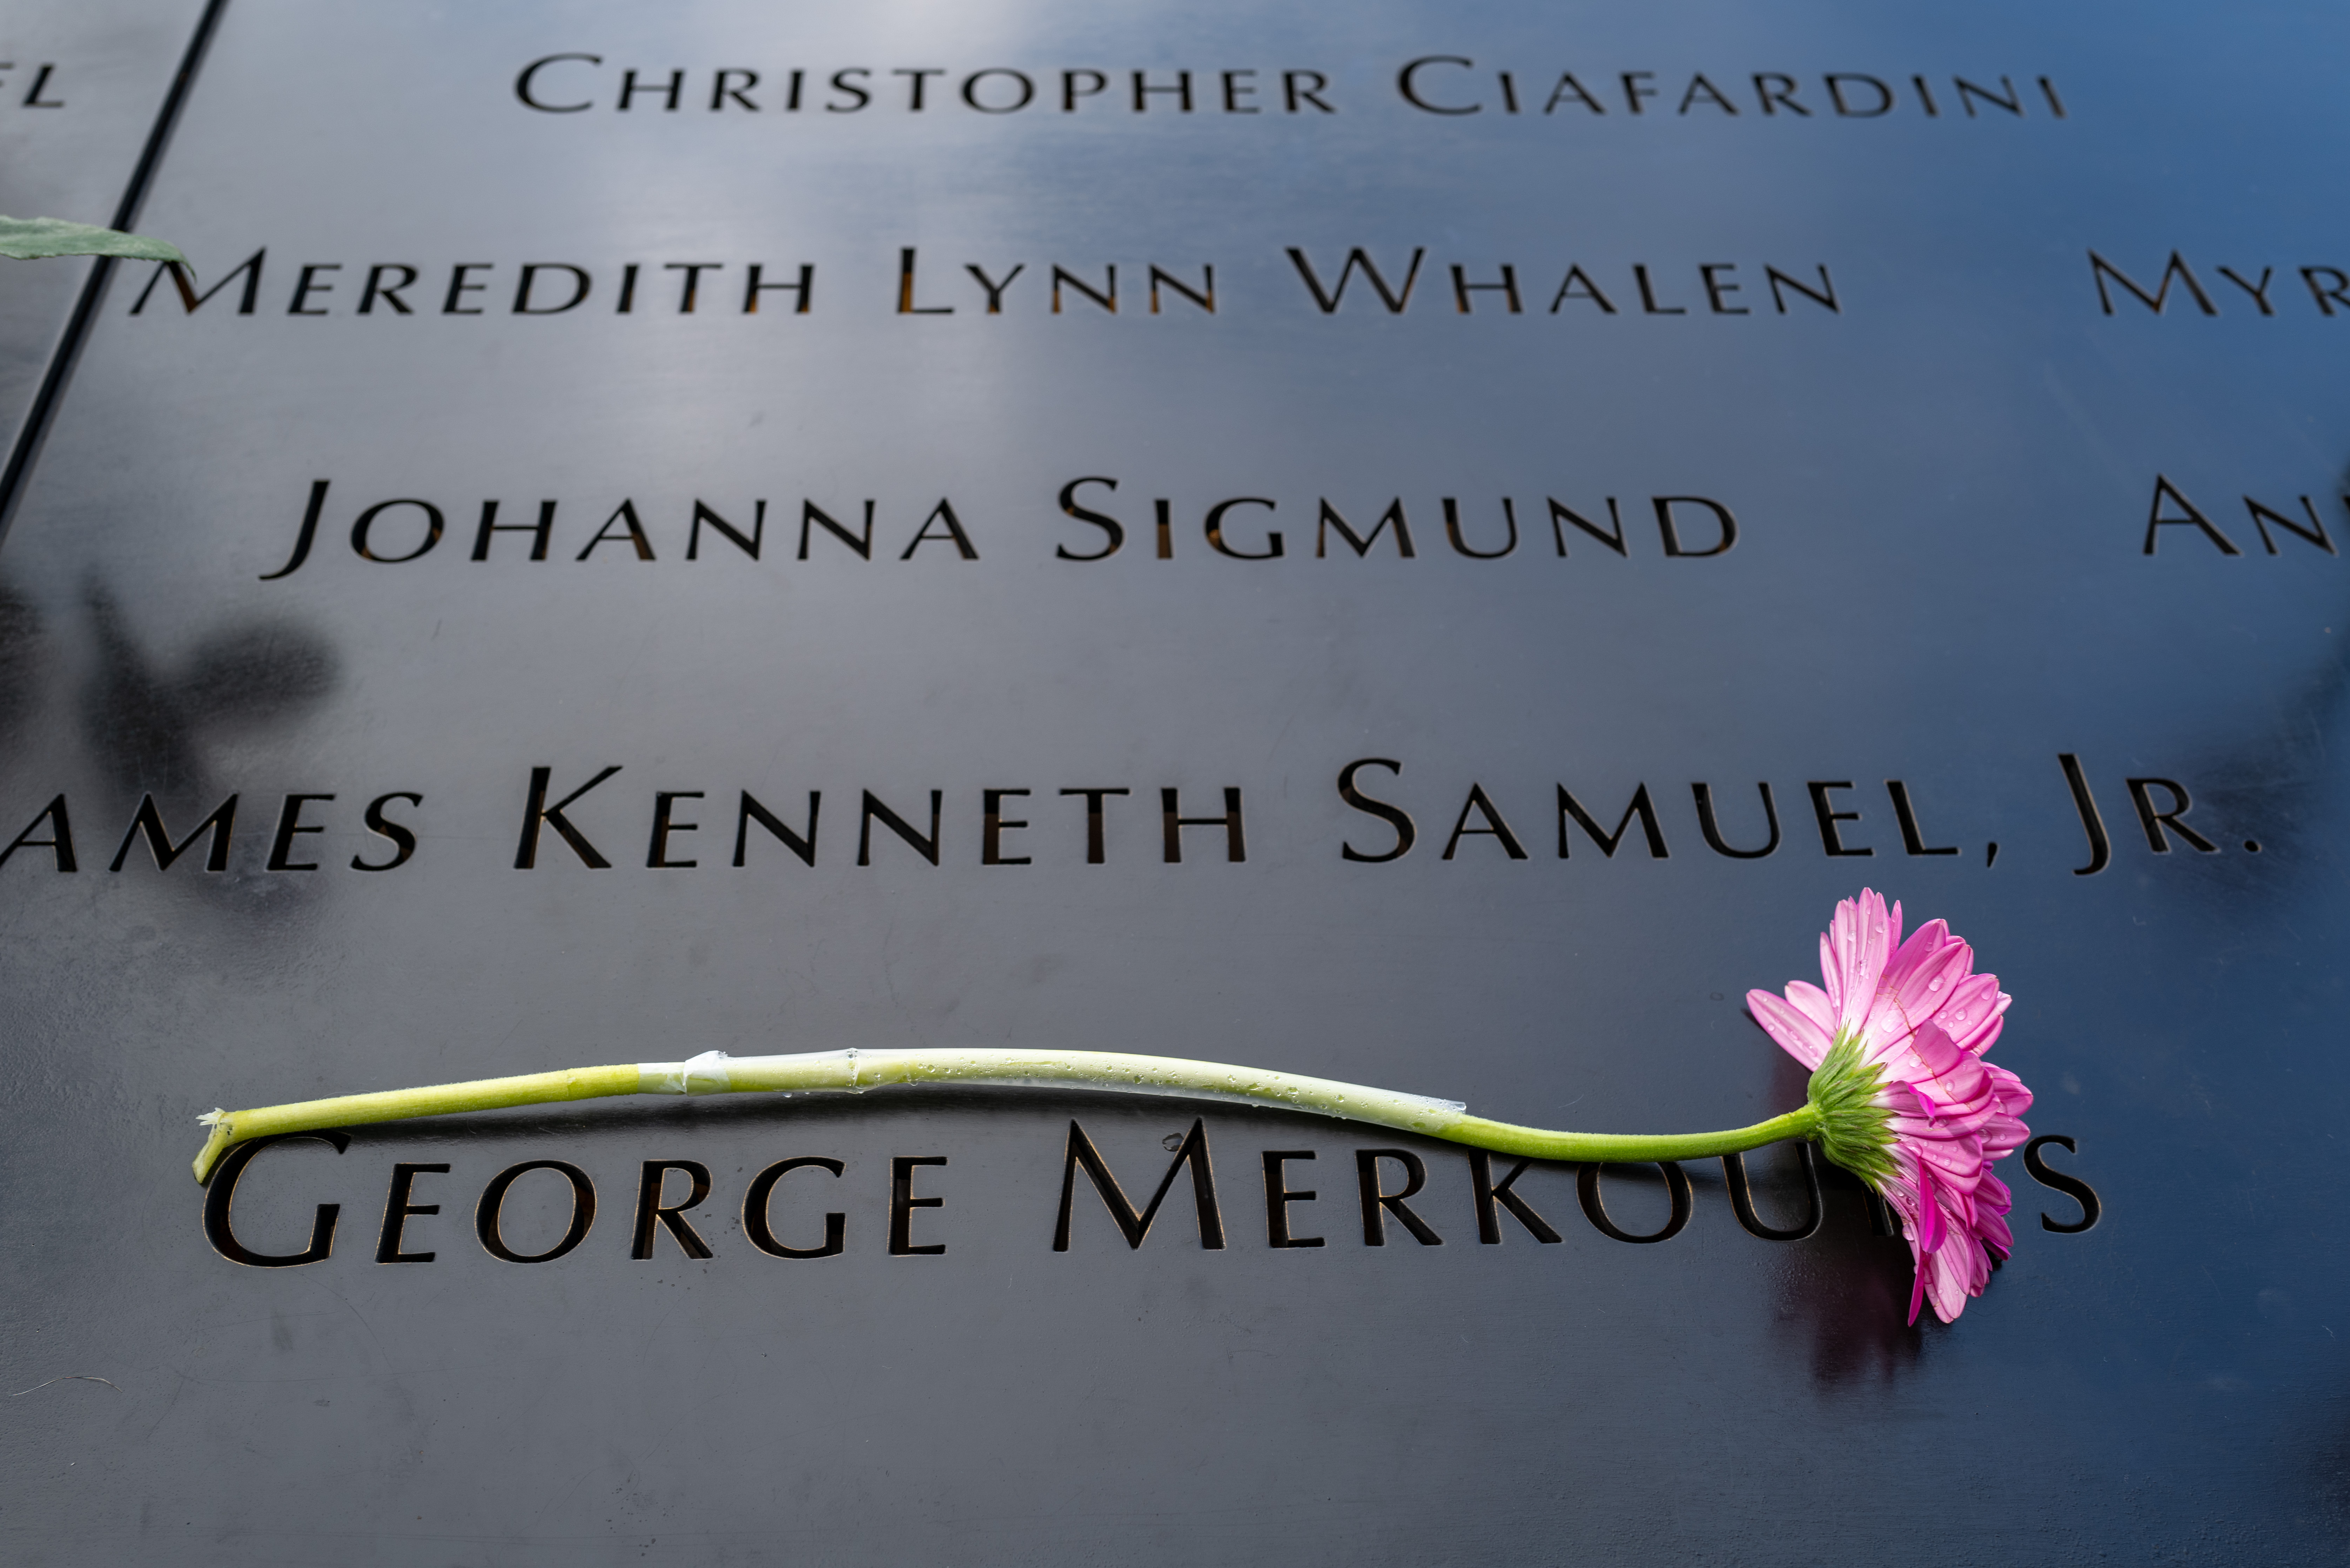 22nd Anniversary Of The 9/11 Attacks Observed In New York City